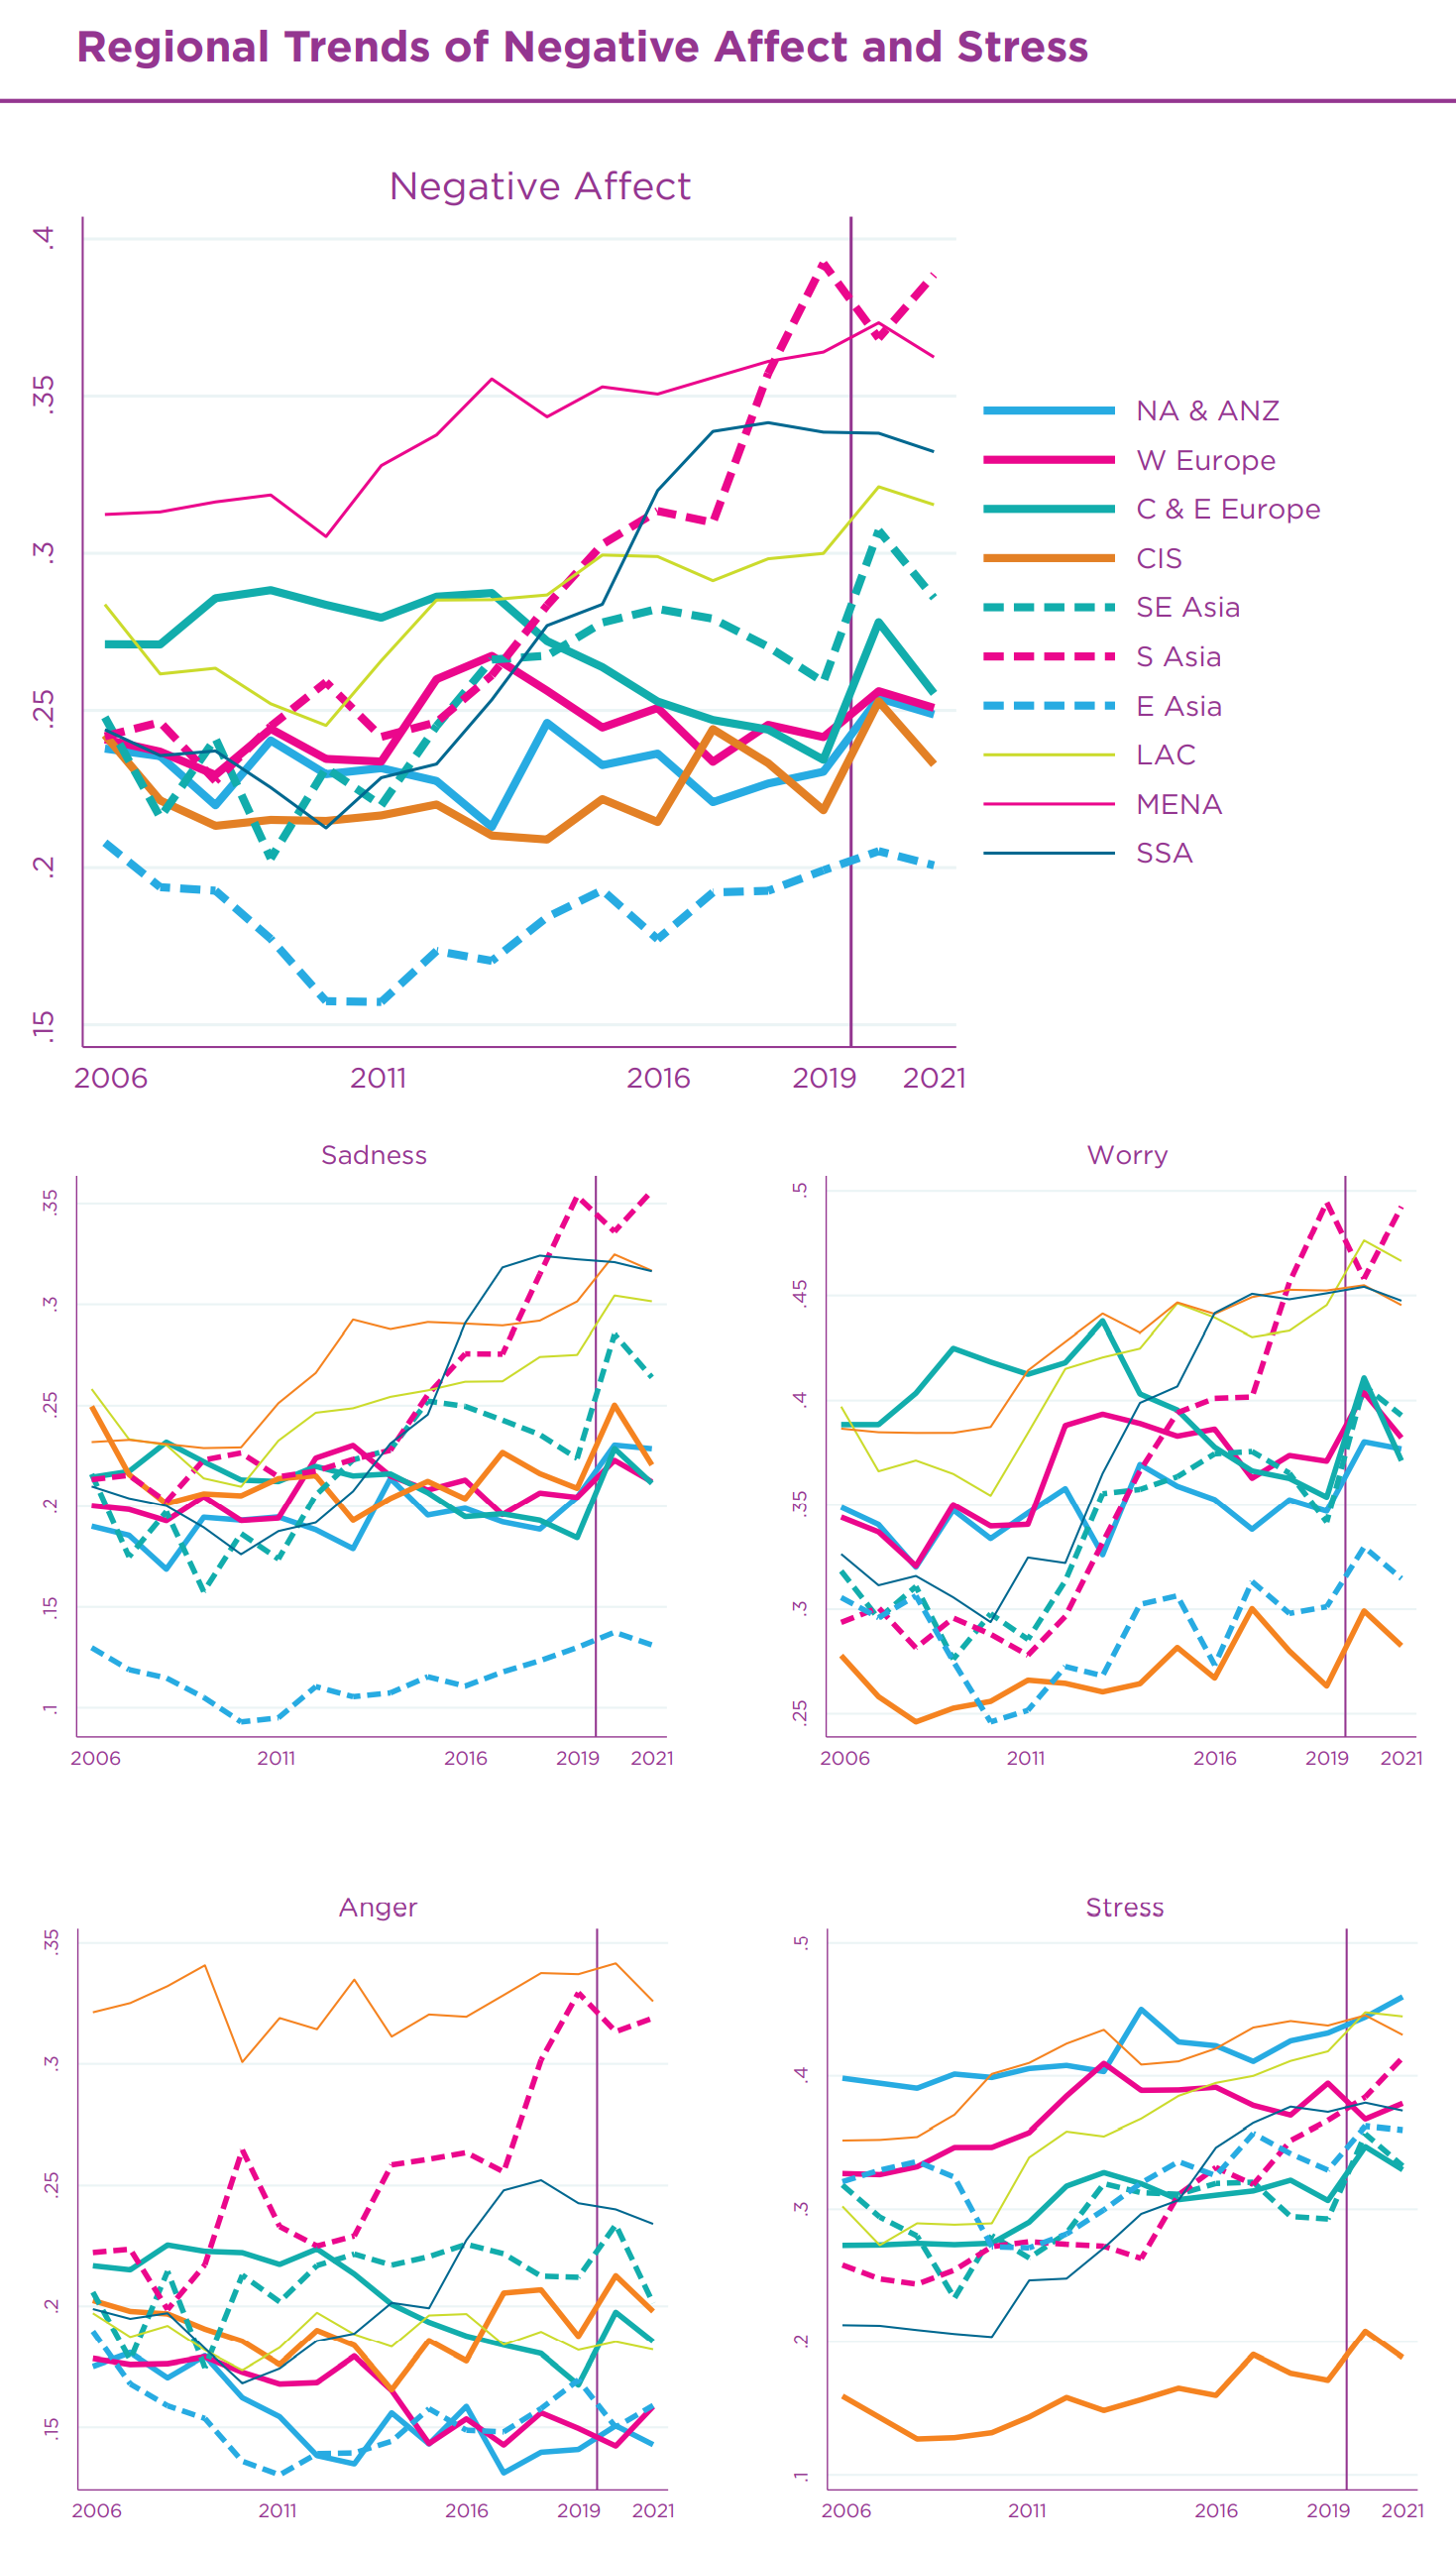 Regional Trends of Negative Affect and Stress, 2006-2021. Negative affect as a whole was highest and rising in MENA and South Asia, with the increase greatest in South Asia. All regions have more negative affect now than ten years ago, except for Eastern Europe. Graphic: SDSN World Happiness Report